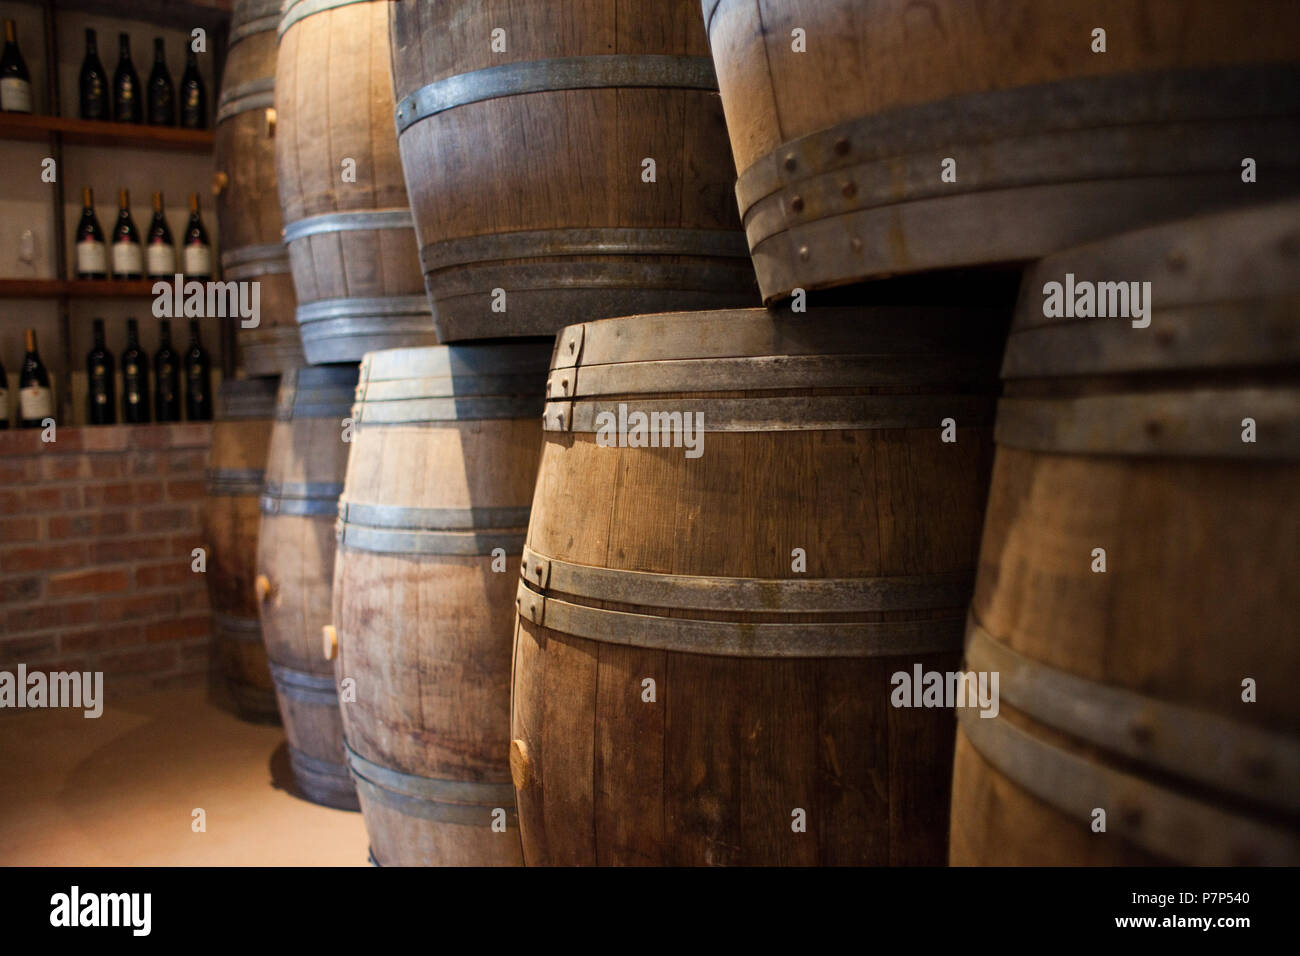 Barrels of South African wine stacked for sale Stock Photo